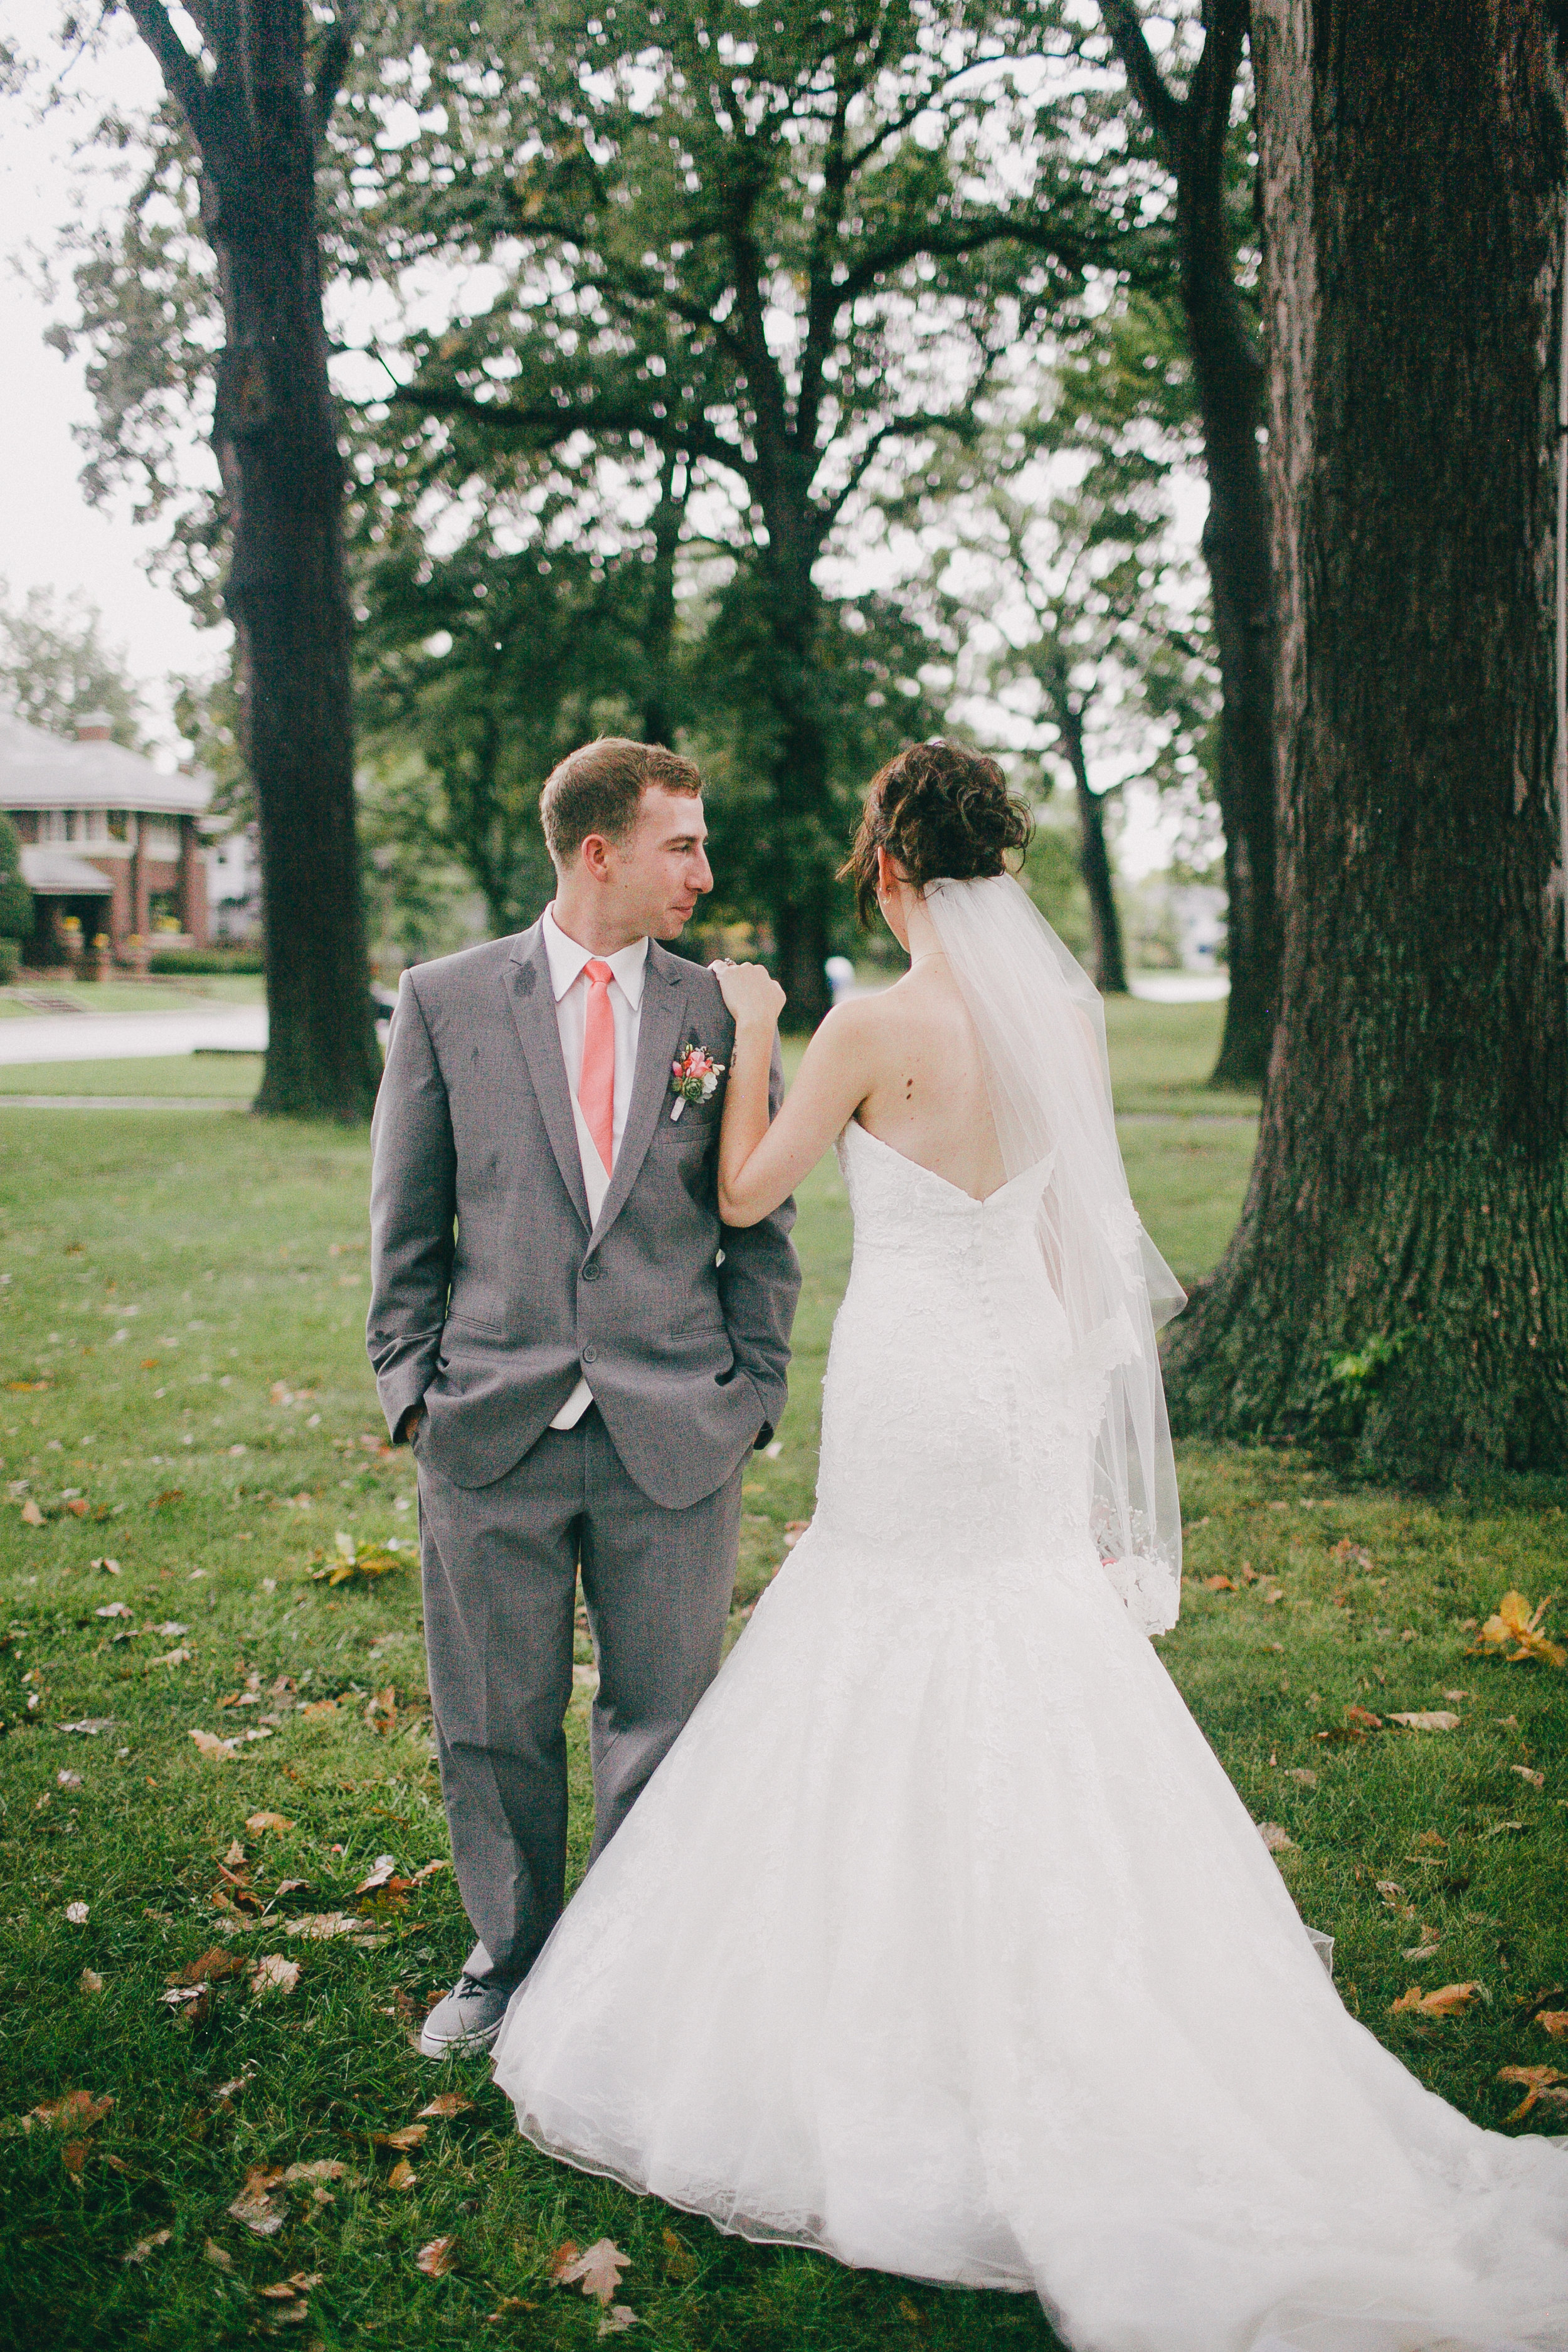 Brooke Summers Photography | My Wedding Photography Investment